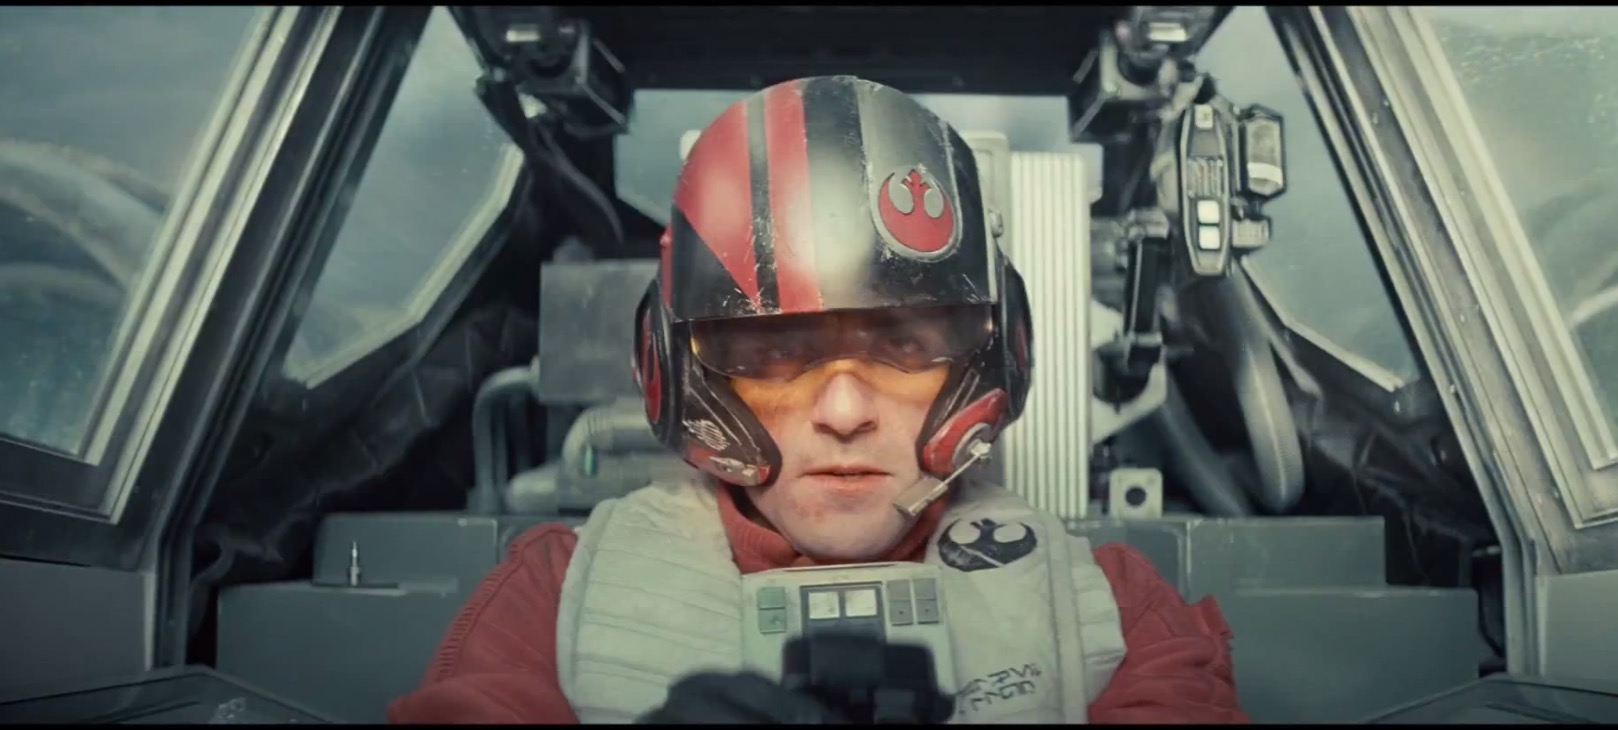 The Star Wars The Force Awakens trailer is online in full HD.